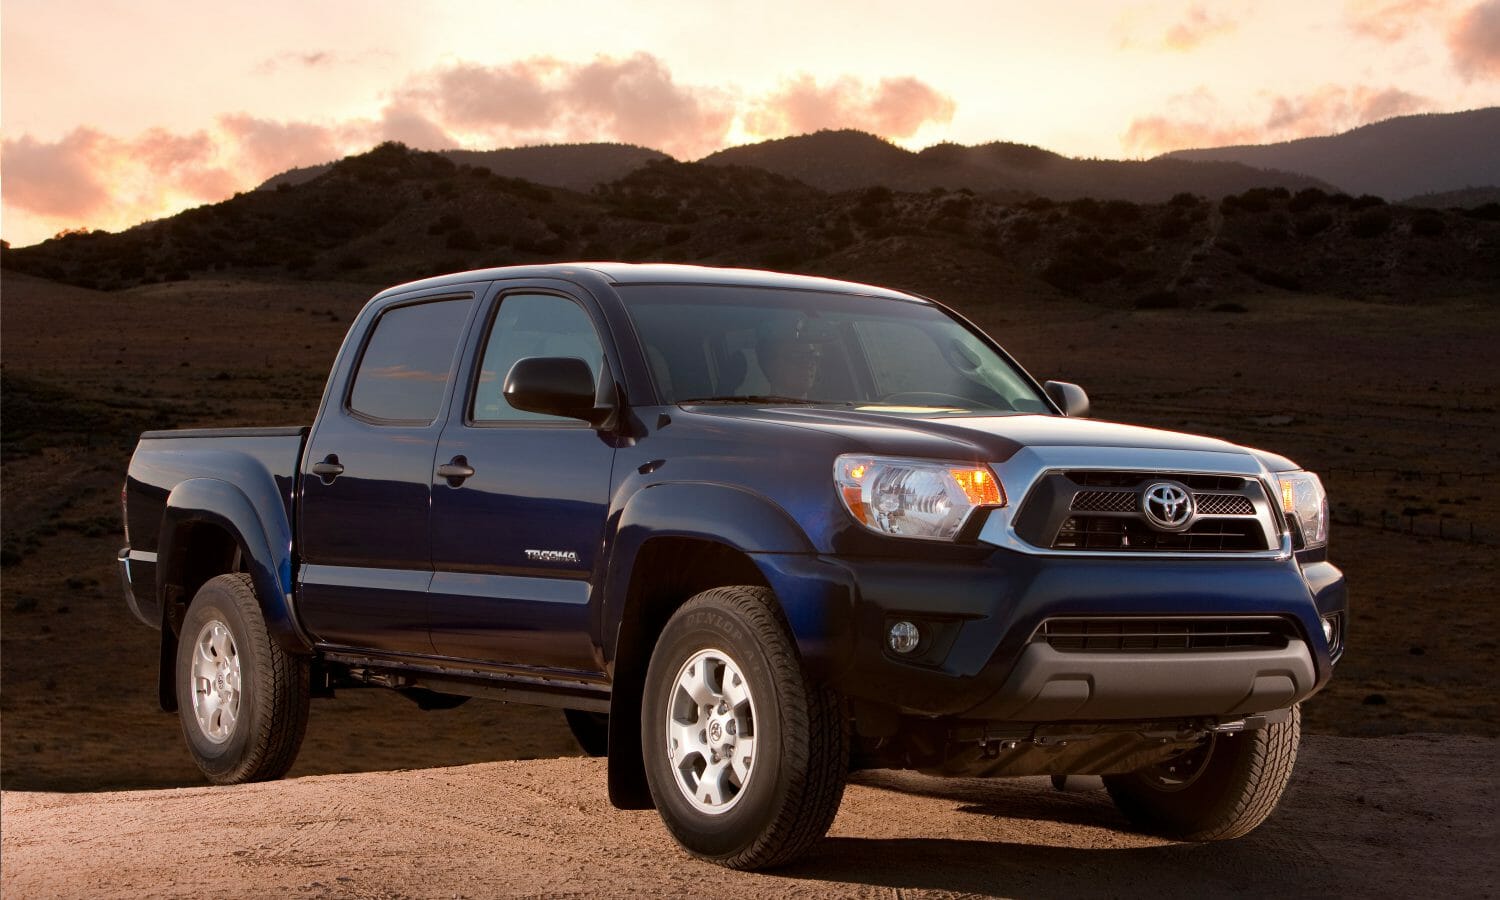 2015 Toyota Tacoma Review: The Highest-Rated Compact Truck with Excellent Reliability